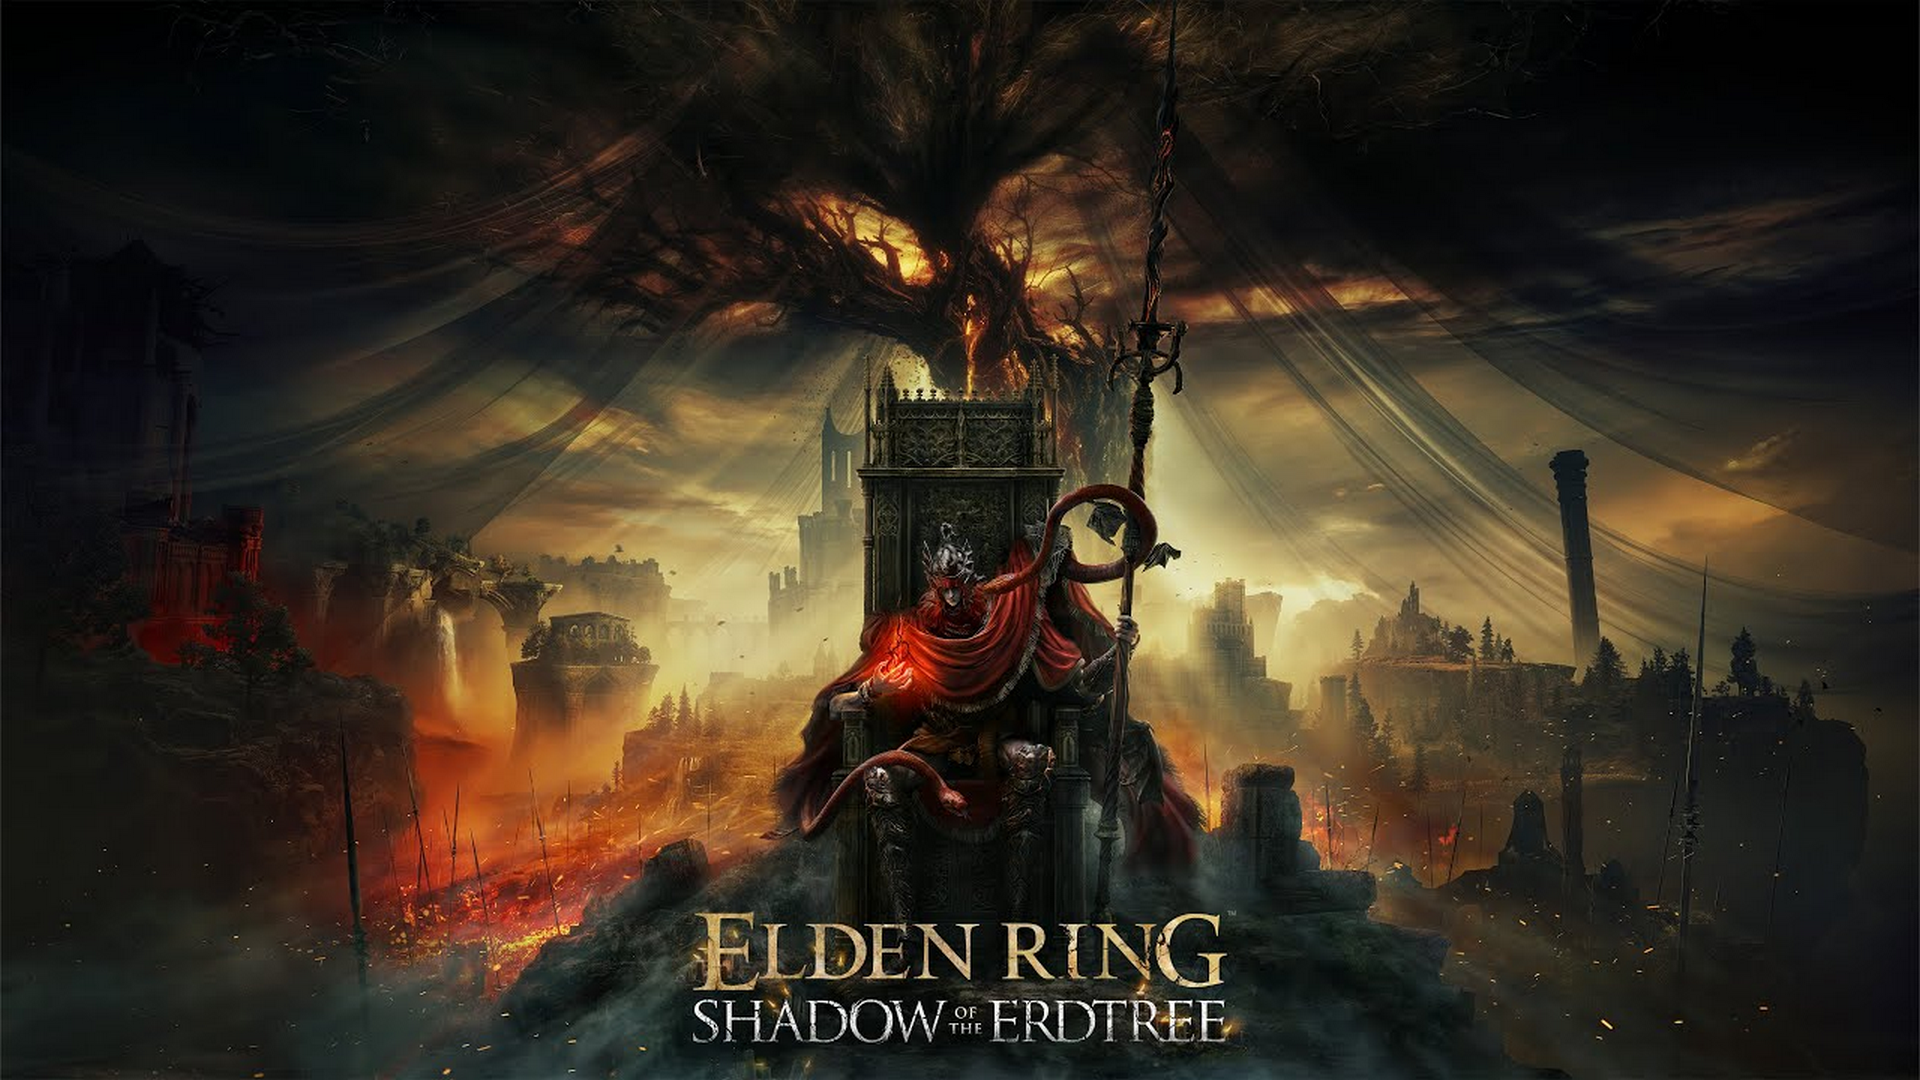 Elden Ring Shadow Of The Erdtree Reaches 5 Million Units Sold Worldwide – New Accolades Trailer